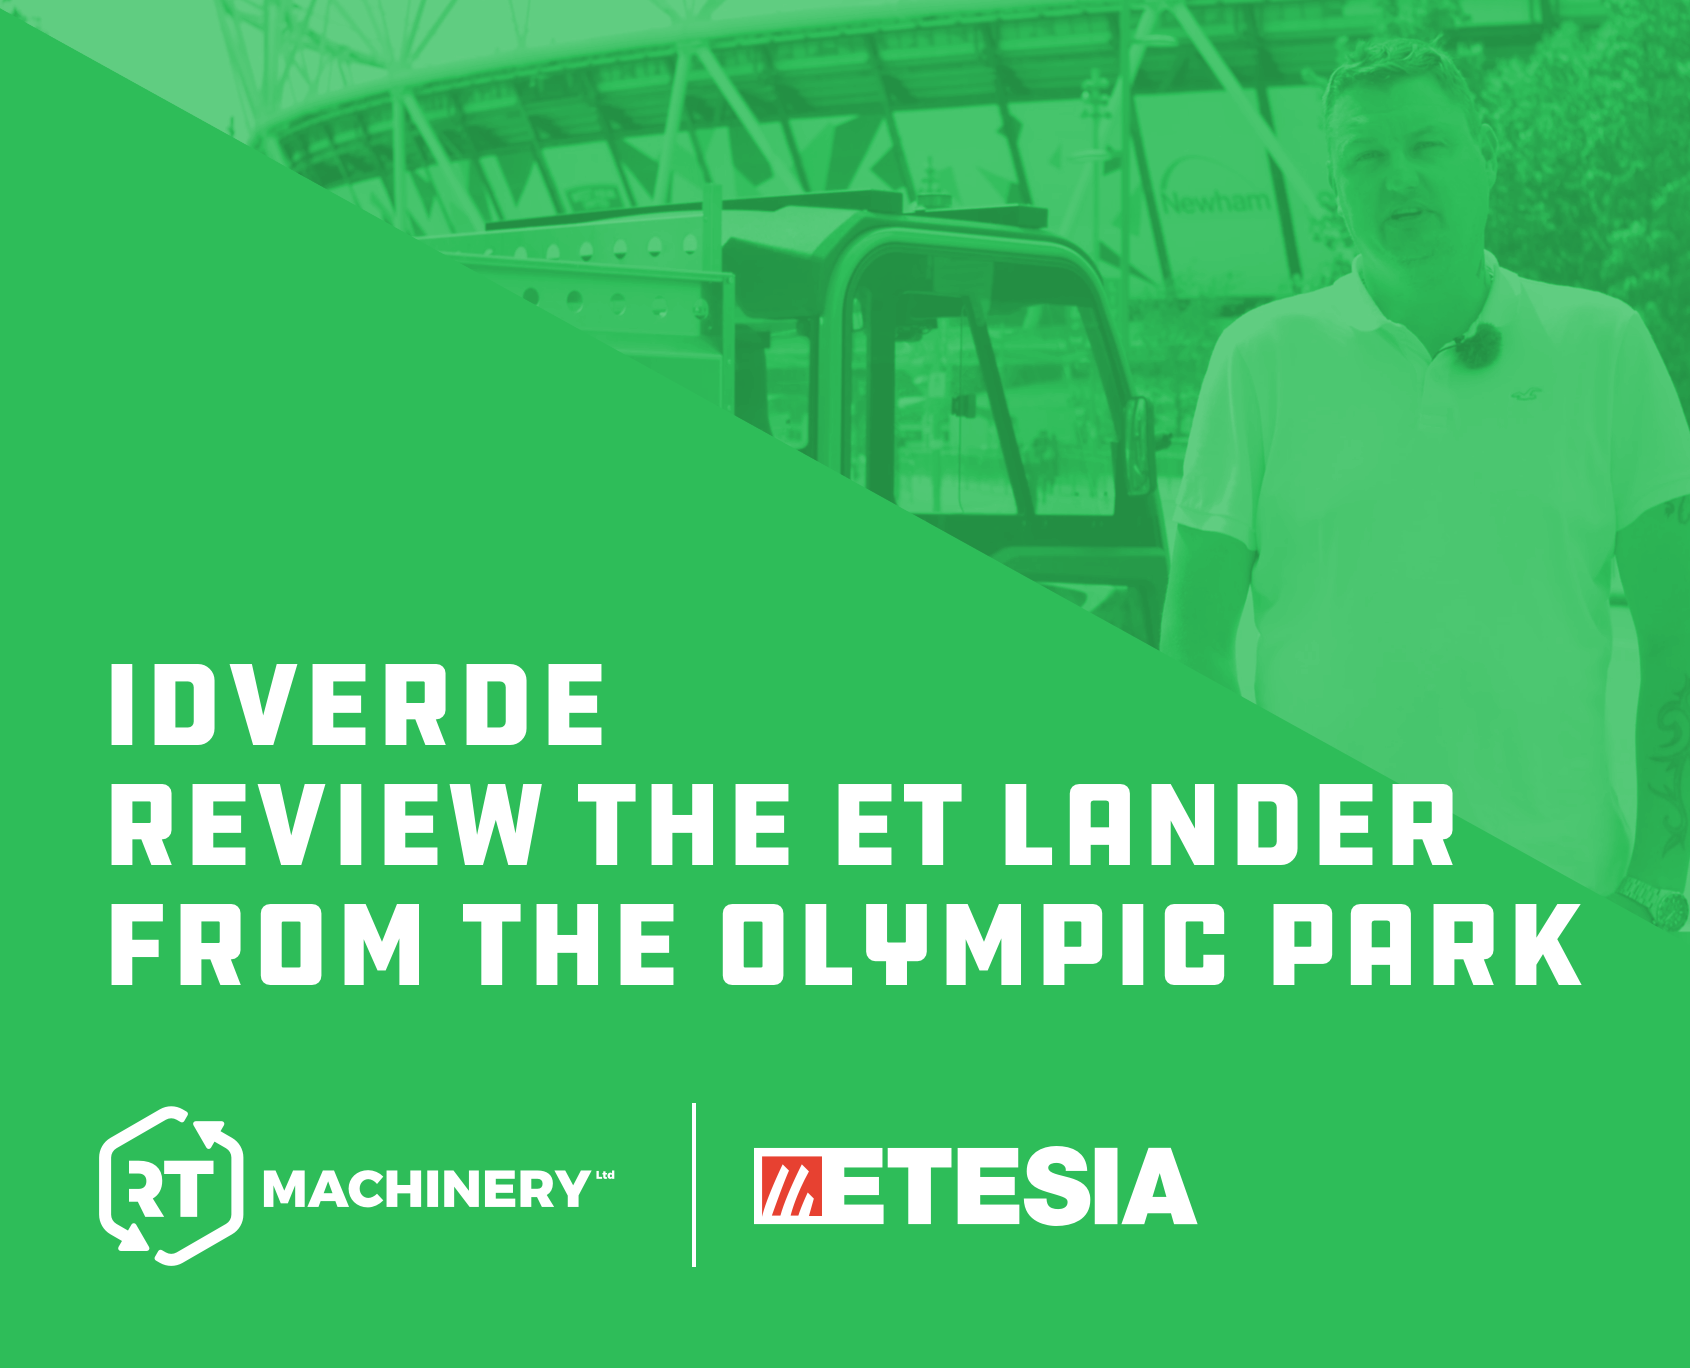 idverde UK Review the ET Lander from the Olympic Park